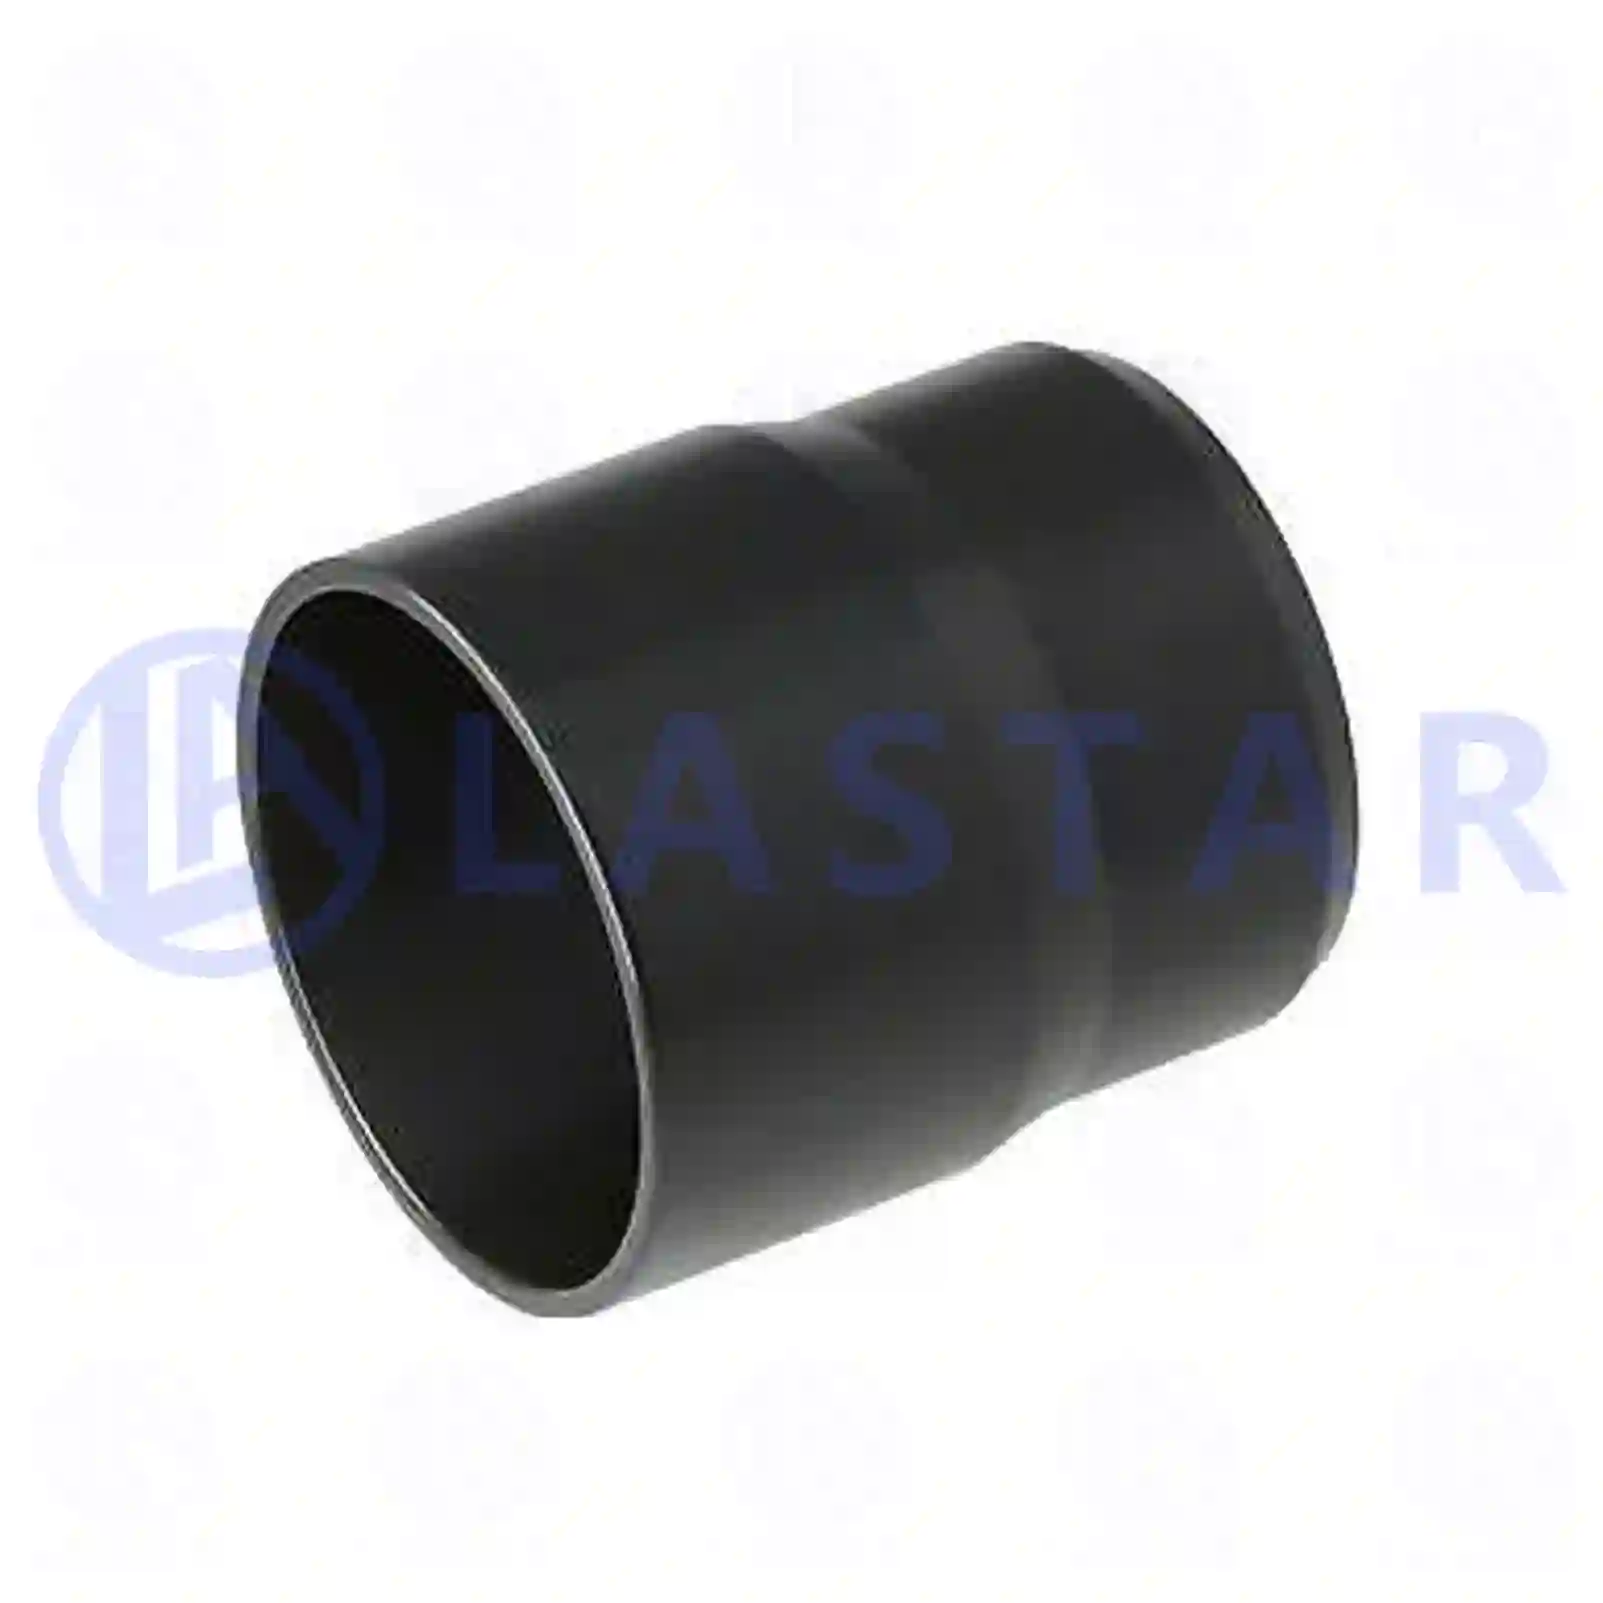  Sleeve, cylinder head || Lastar Spare Part | Truck Spare Parts, Auotomotive Spare Parts